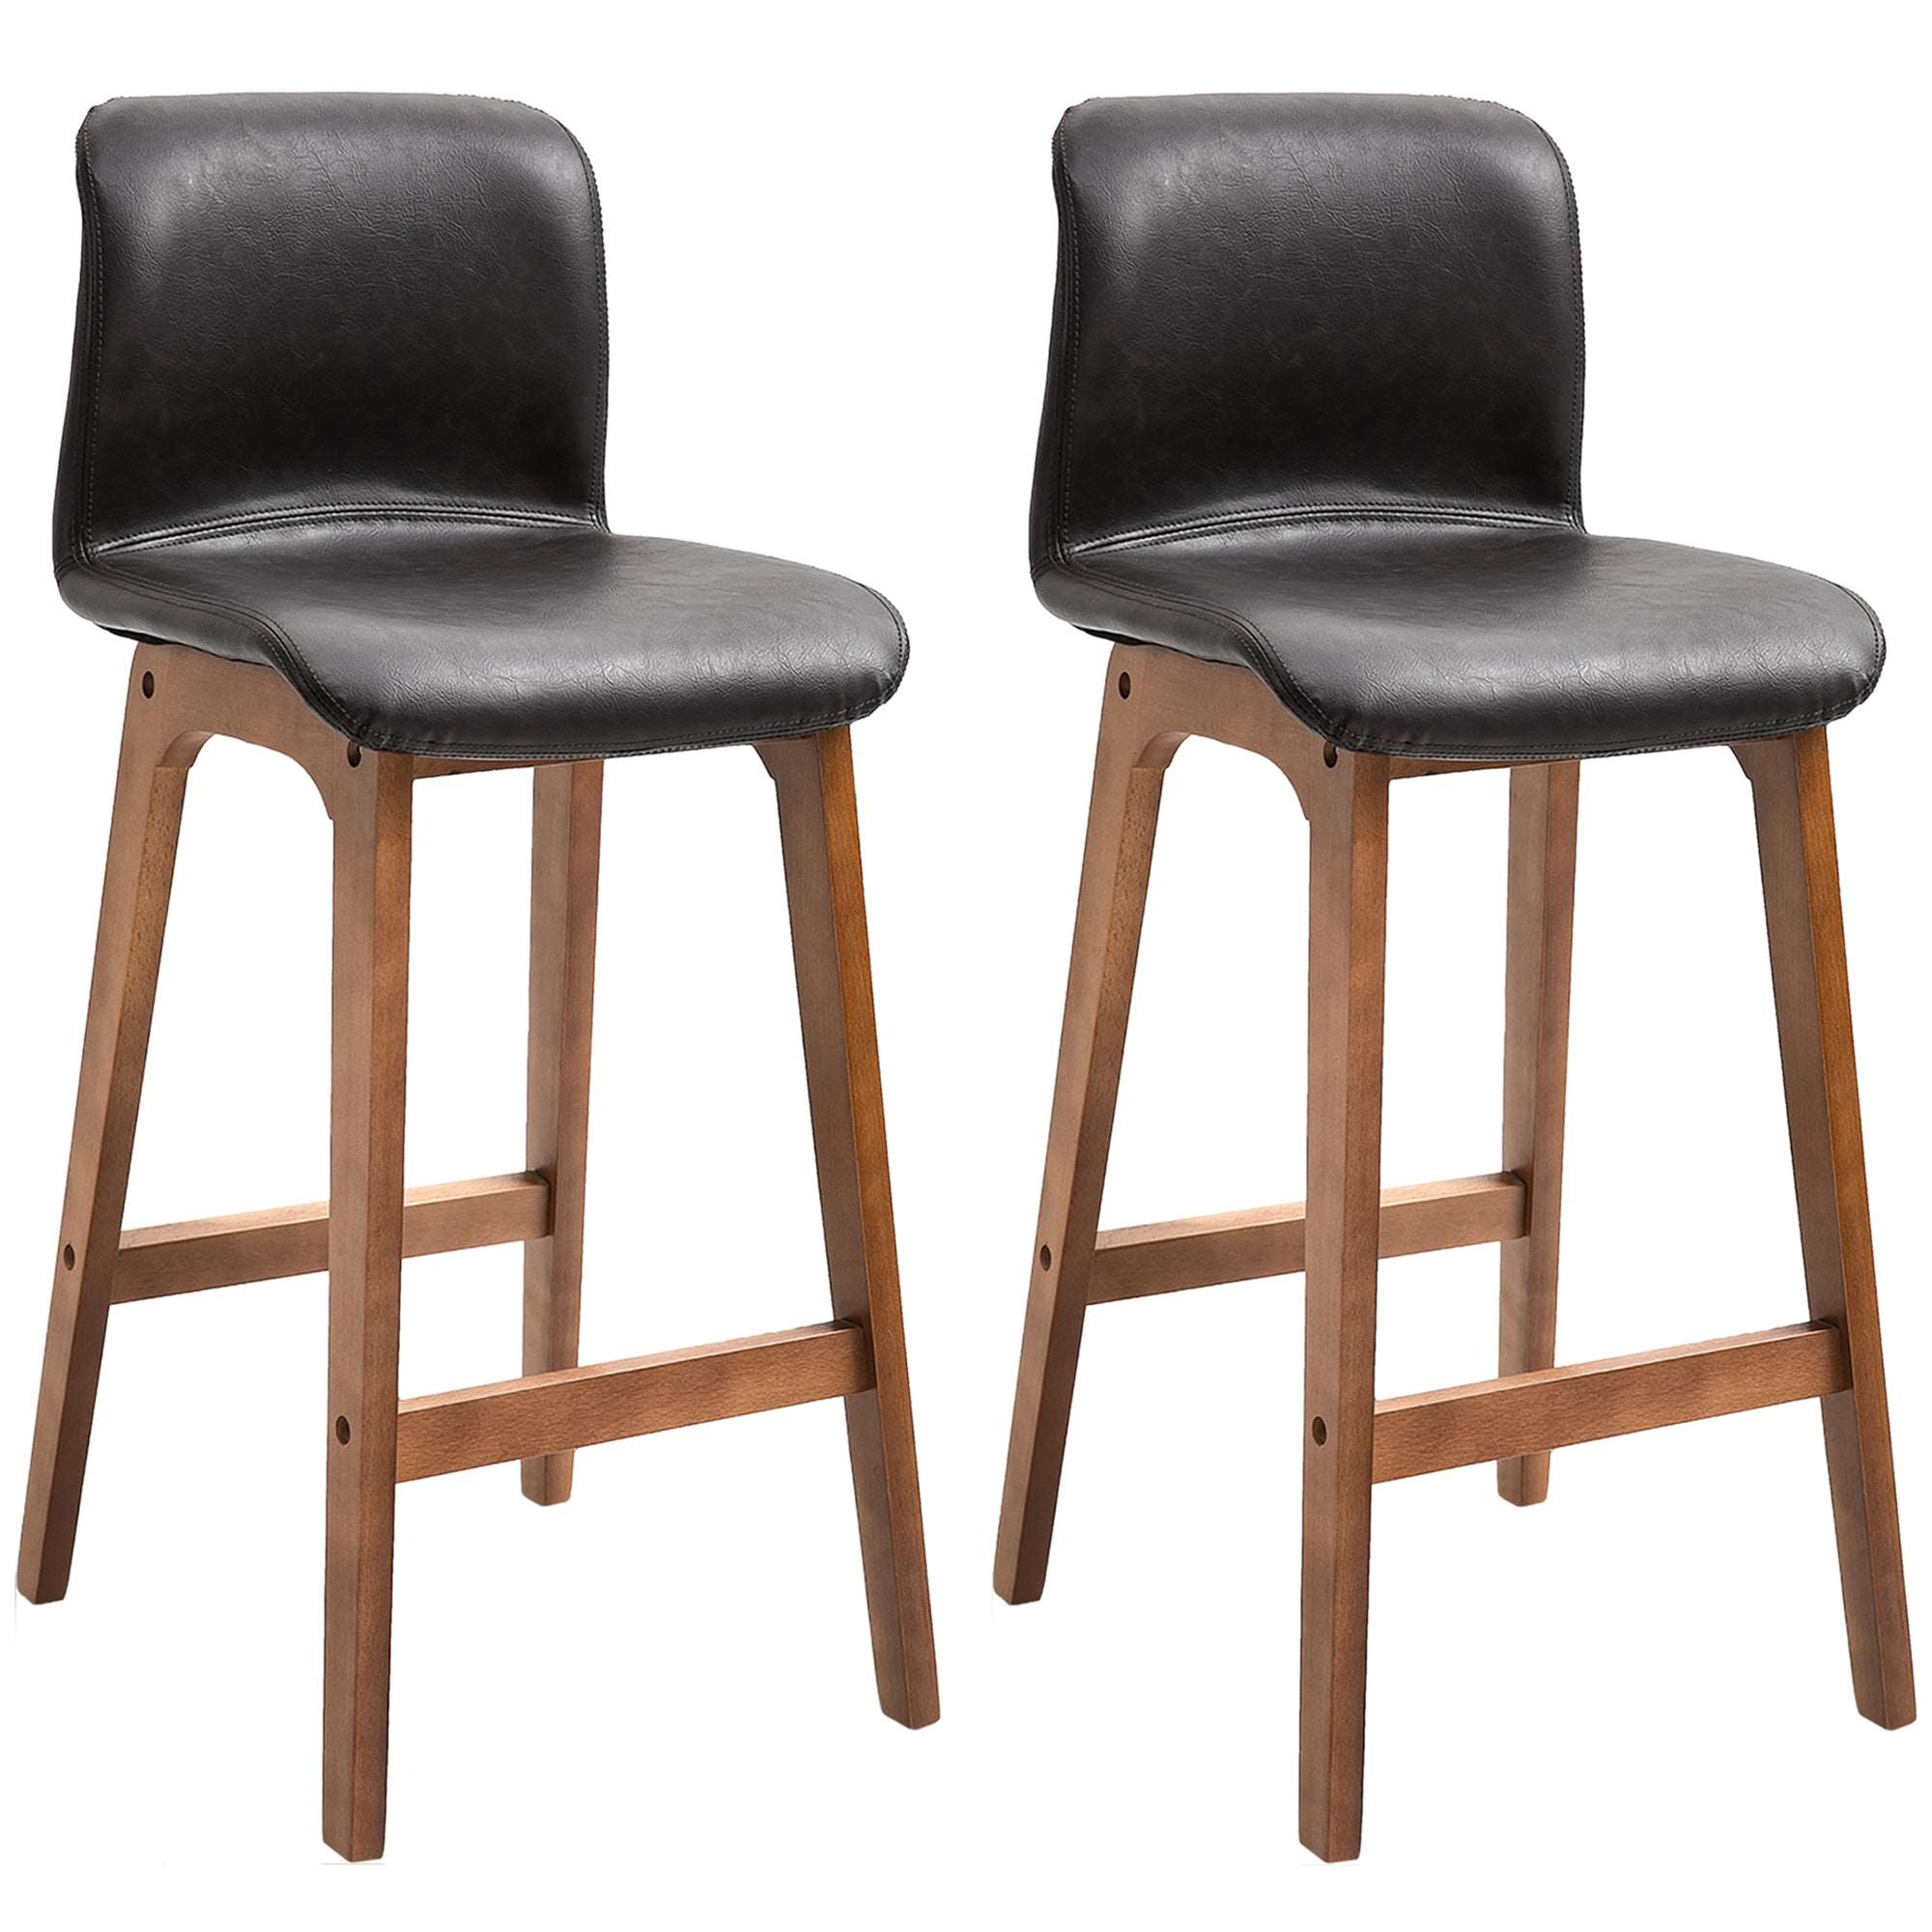 Modern Bar Stools Set of 2, PU Leather Upholstered Bar Chairs with Wooden Frame, Footrest for Home Bar, Dining Room  AOSOM   